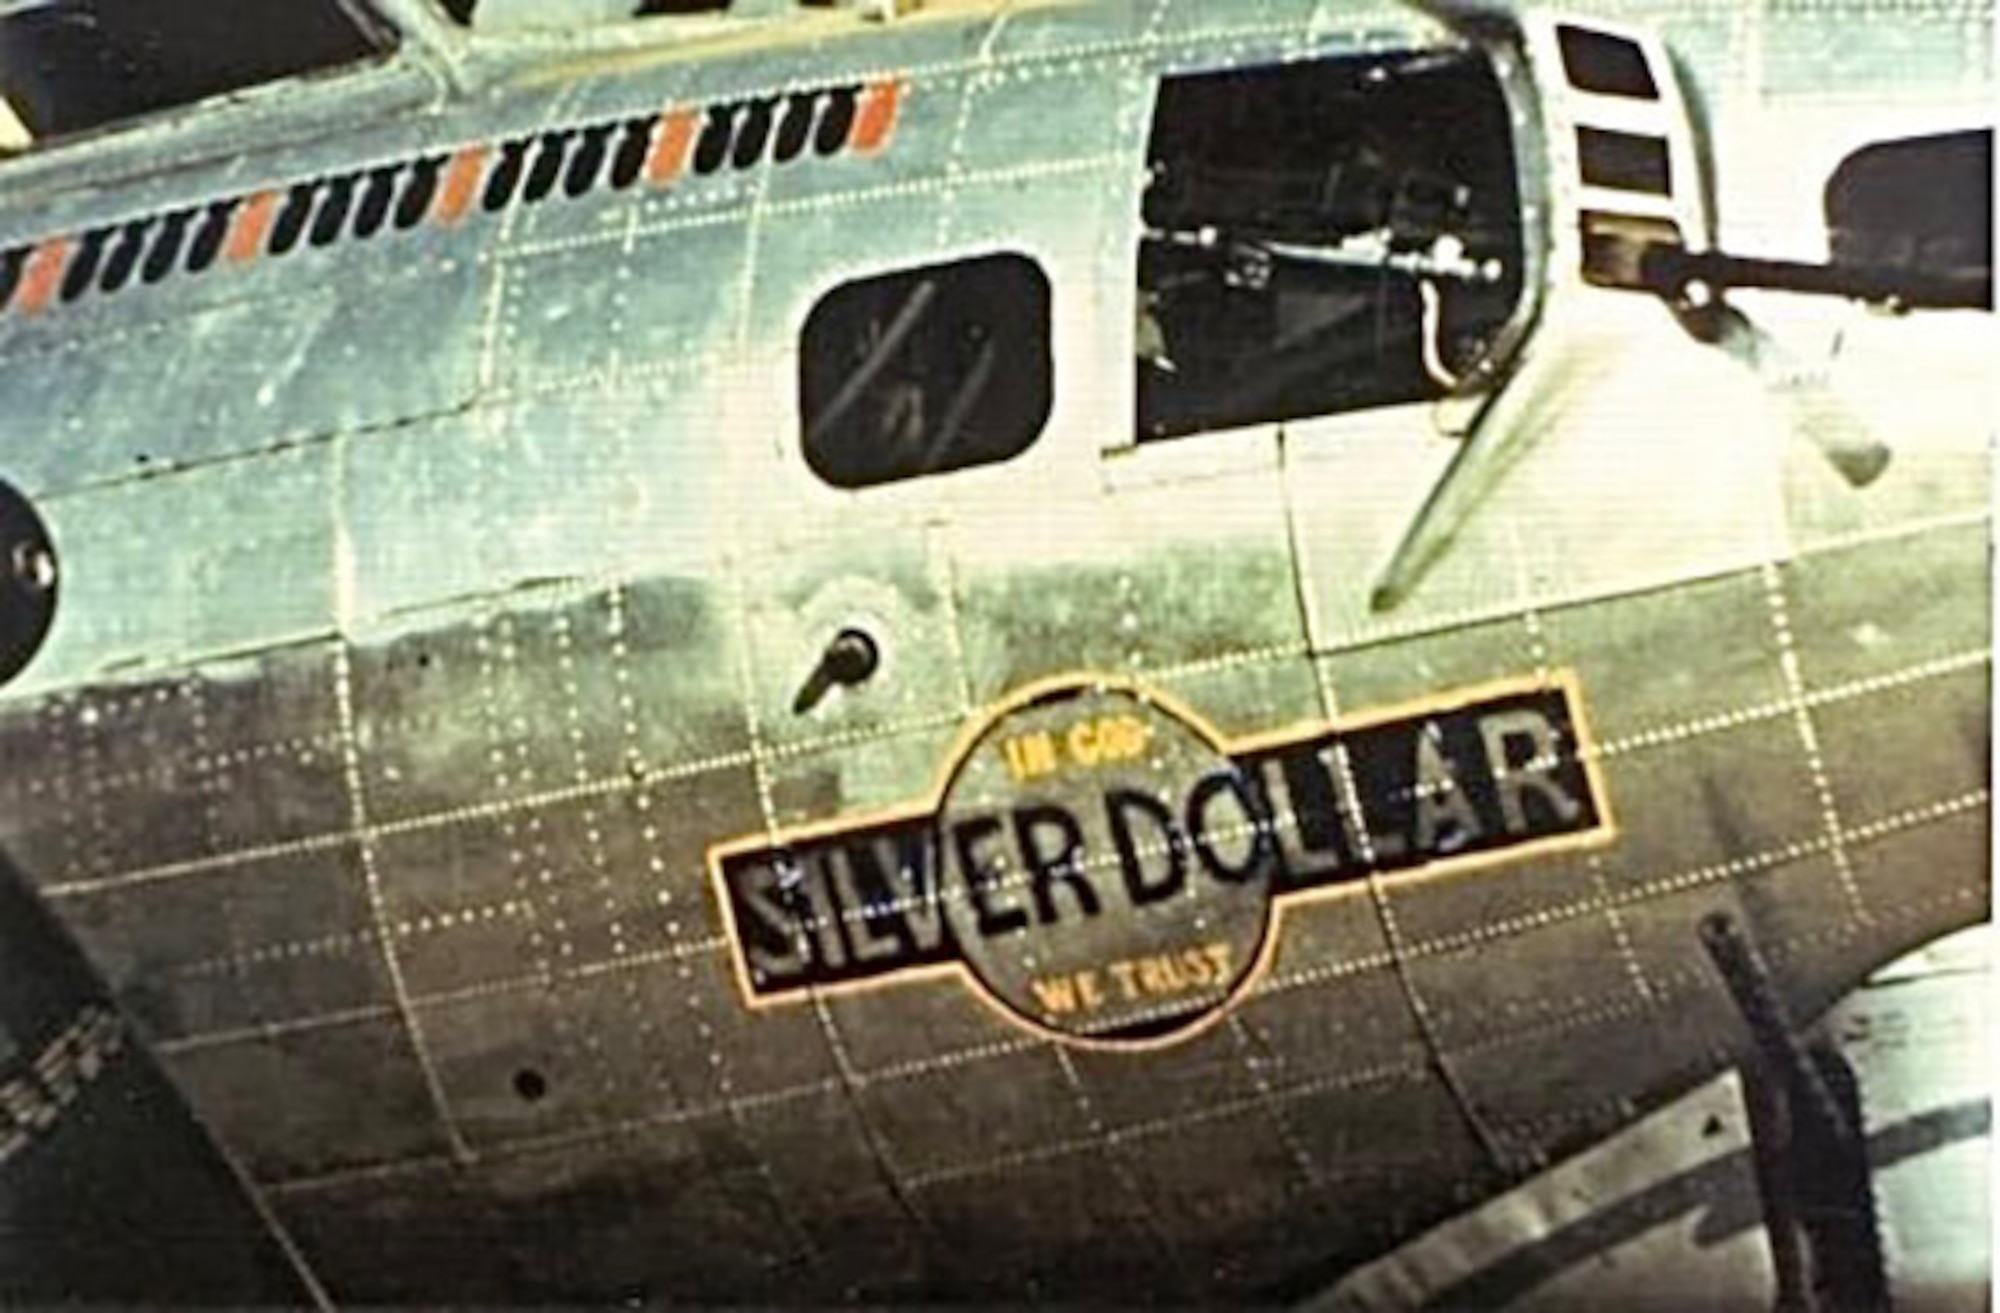 The “Silver Dollar” nose art painted on a B-17 Flying Fortress assigned to the 100th Bomb Group at Thorpe Abbotts, Norfolk, England, during World War II, was the only double-sided nose art in 1943. Eighty years later, the “Silver Dollar” nose art has been updated and redesigned – again as a double-sided “coin” – and has just been unveiled on one of the 100th Air Refueling Wing’s KC-135 Stratotankers at Royal Air Force Mildenhall, England, Oct. 10, 2023. (Courtesy photo from 100th Bomb Group Foundation archives)